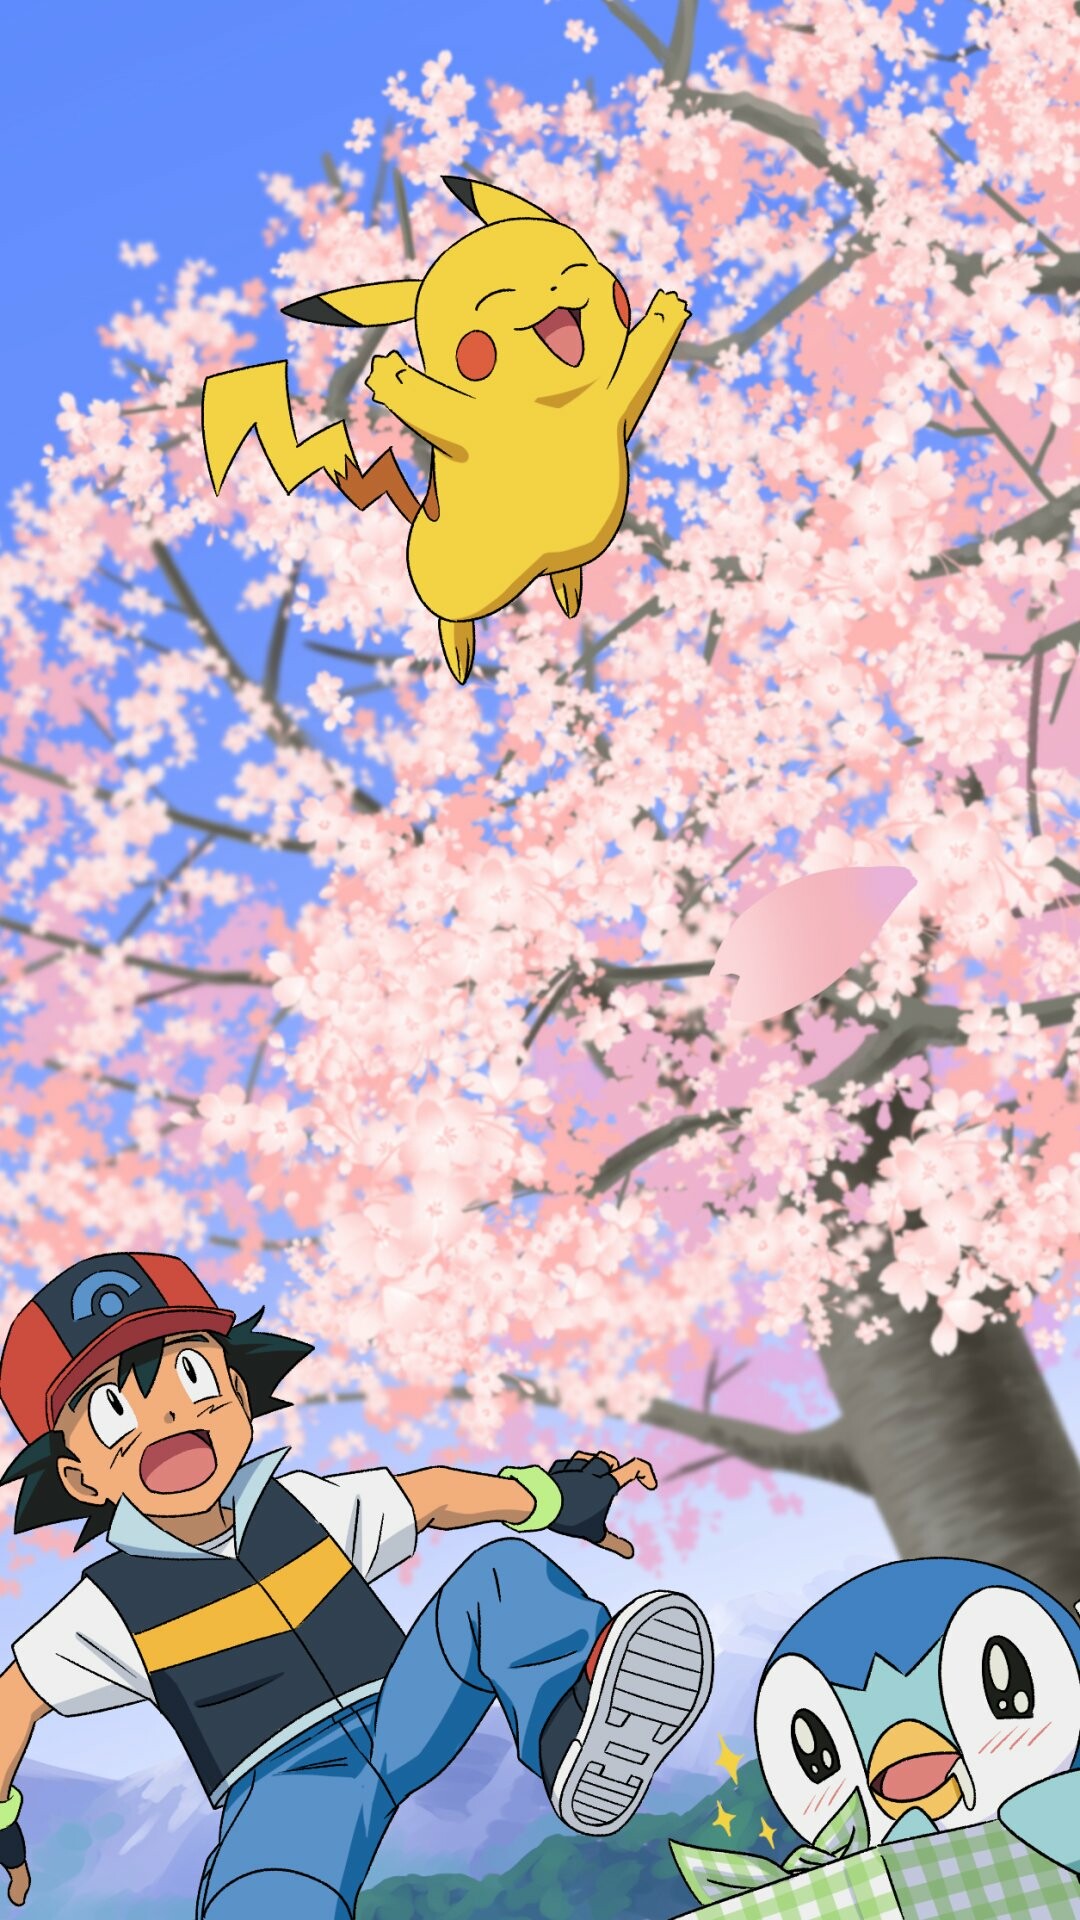 Pokemon (Anime): The series follows Ash Ketchum, a young trainer of fictional creatures. 1080x1920 Full HD Wallpaper.